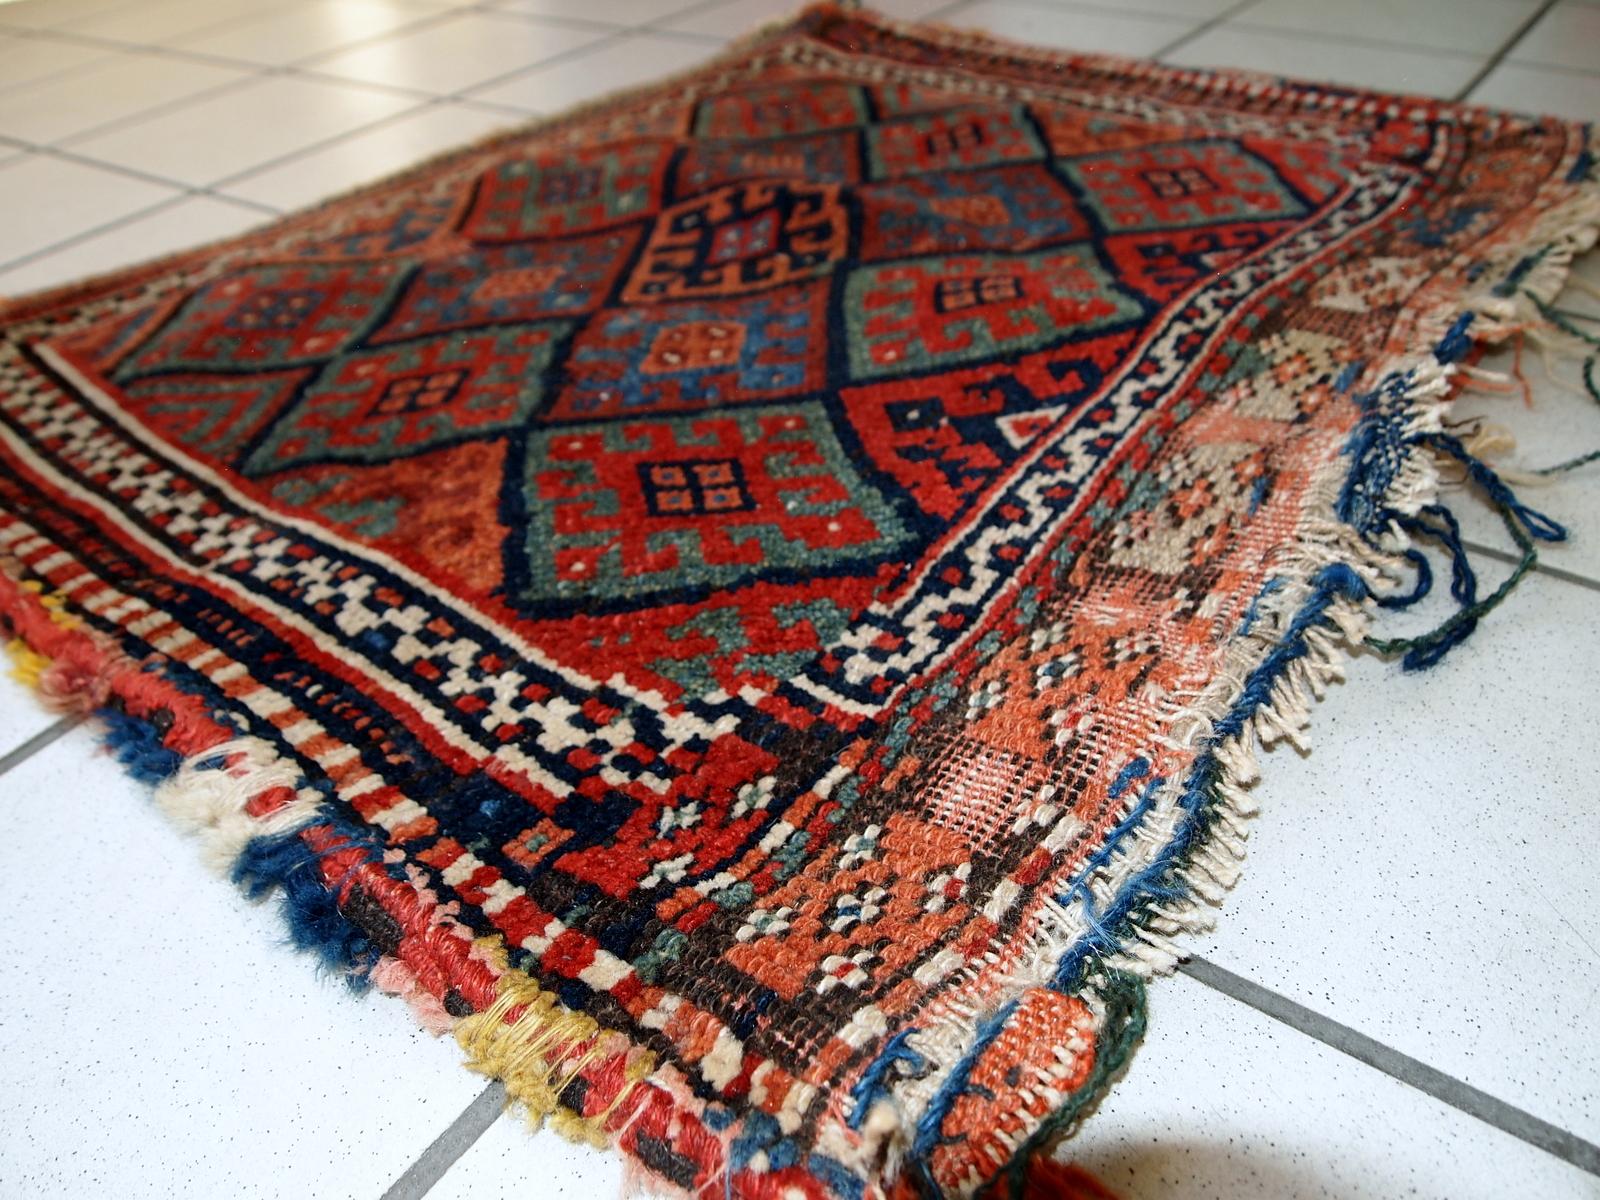 Handmade antique collectible Persian Kurdish bag in original condition, it has some age wear. This bag has typical Jaff design with repeating diamond in different shades. The back side Kilim is striped in red and chocolate brown shades.